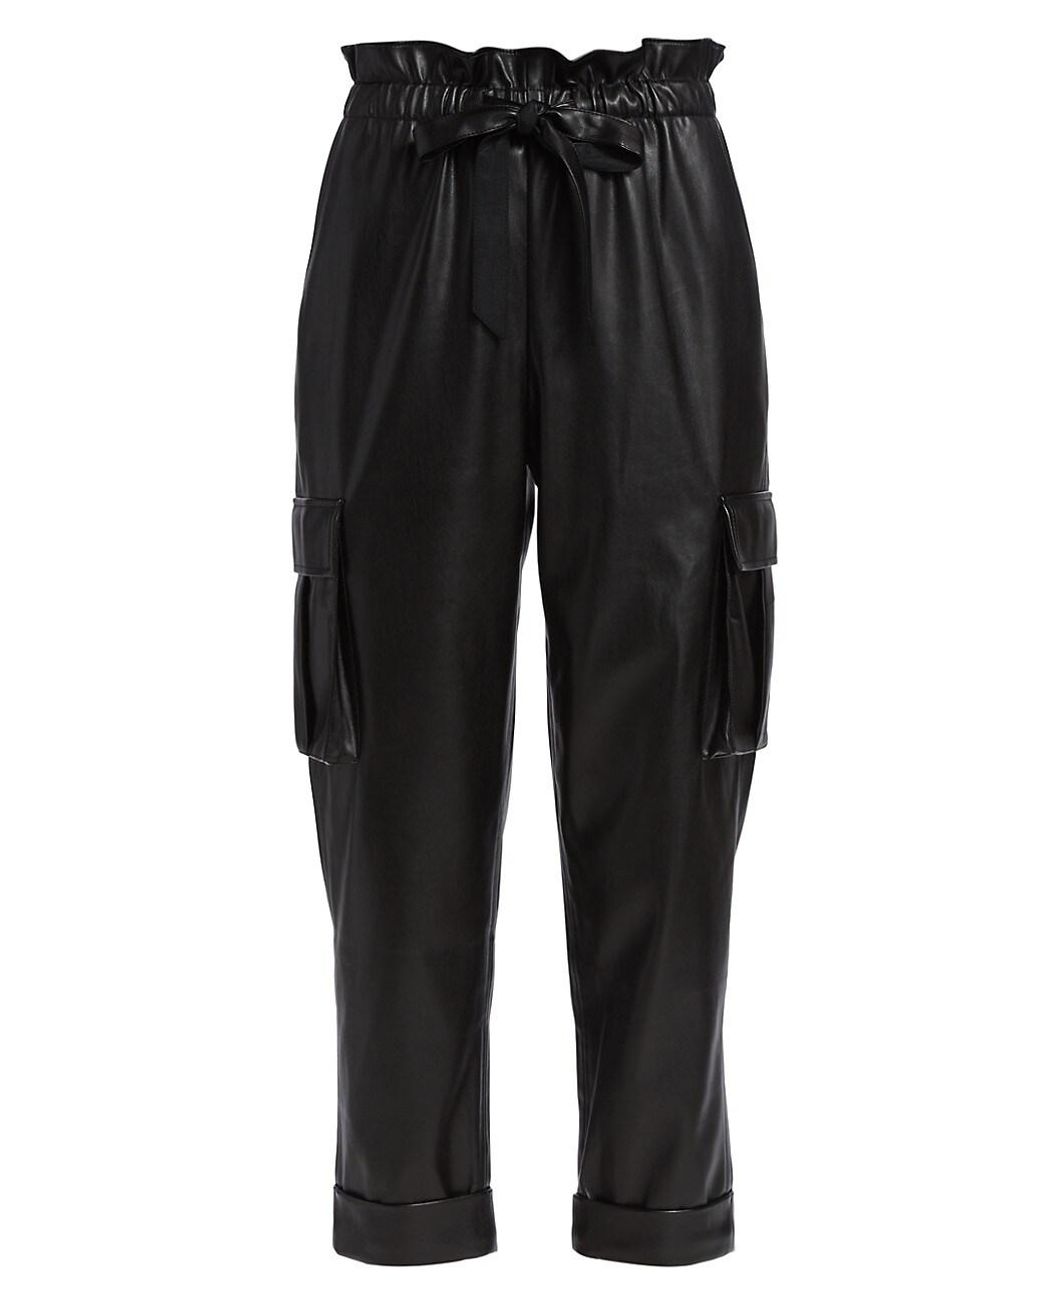 Cami NYC Addy Vegan Leather Cropped Pants in Black | Lyst